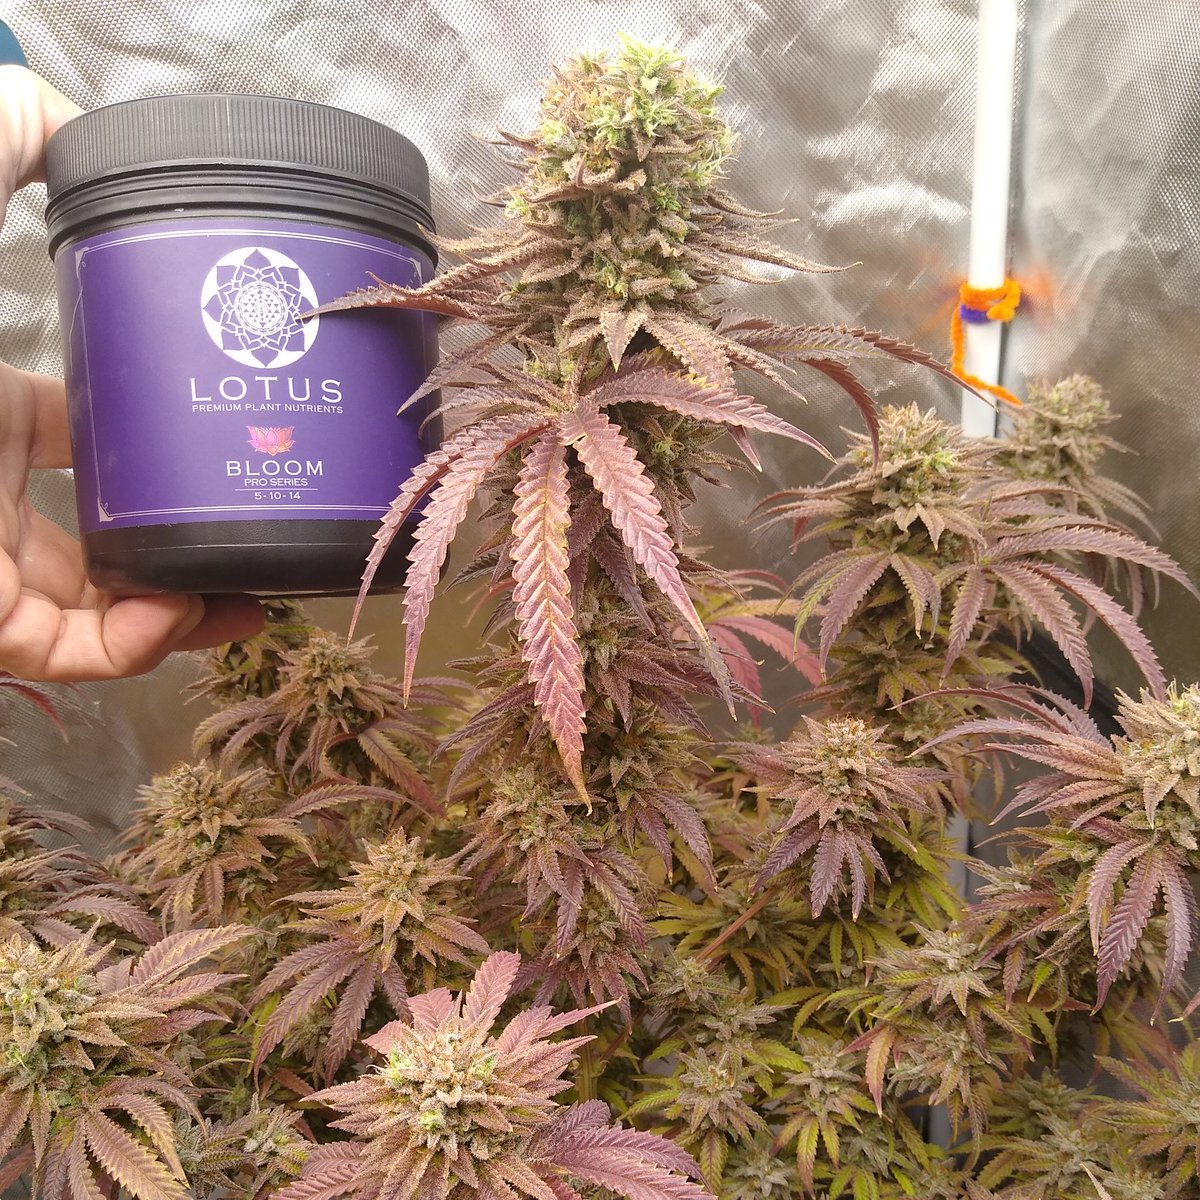 Did I mention that I'm a proud sponsor of @lotusnutrients 
Best nutrients I've ever used! @GrowStrongInd
Strain: rainbow pebblez f2
Breeder: @abseedco @abseedcompany 
#lotusgrow
#lotusnutrients 
#CannabisCommunity #cannabisindustry 
#growstrong
#420community #420friendly